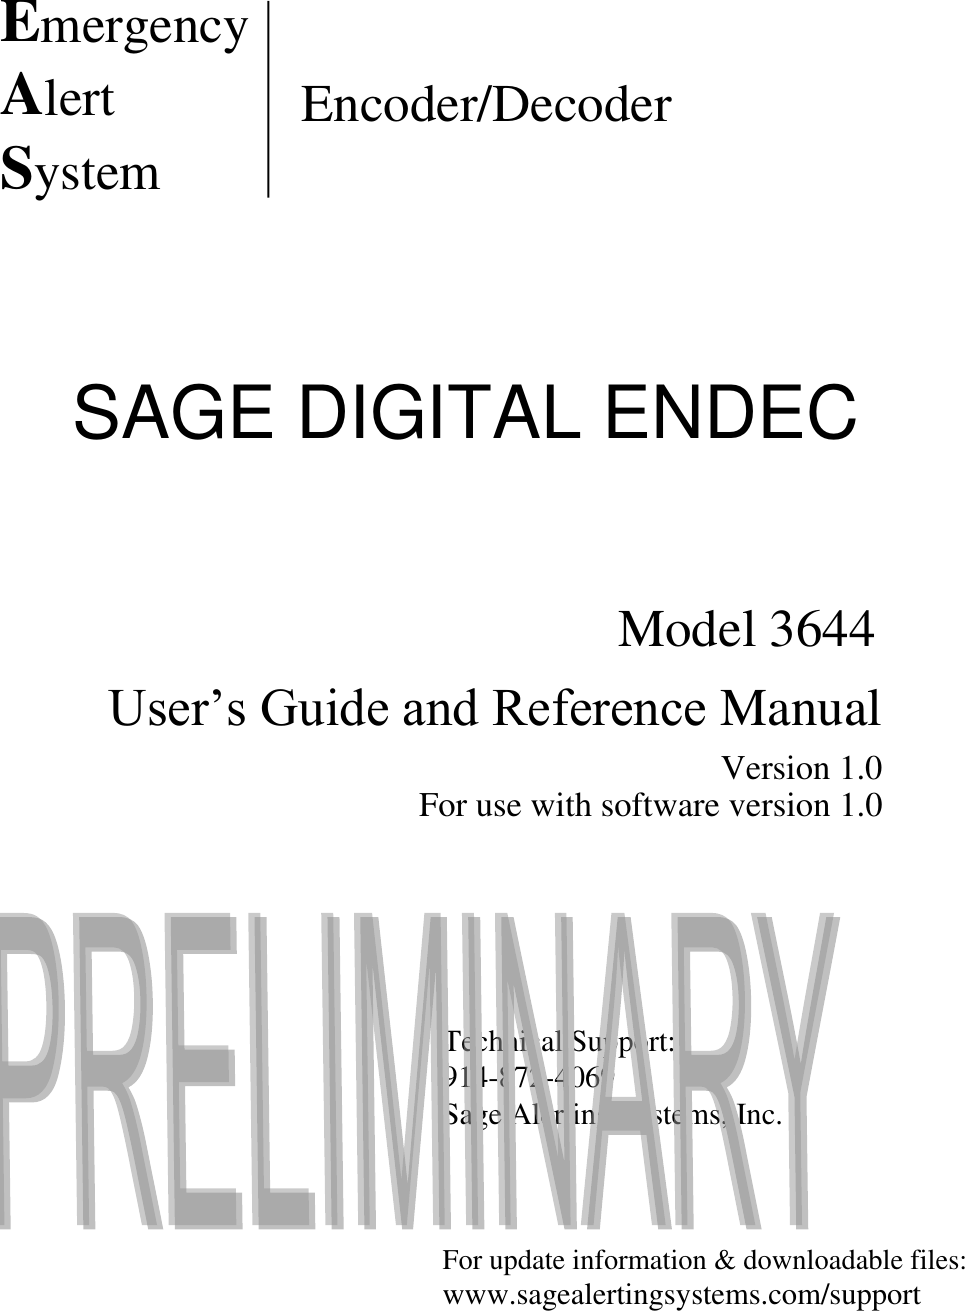  Technical Support: 914-872-4069 Sage Alerting Systems, Inc.   For update information &amp; downloadable files: www.sagealertingsystems.com/support Model 3644 E mergency A lert S ystem Encoder/Decoder User‟s Guide and Reference Manual Version 1.0 For use with software version 1.0 SAGE DIGITAL ENDEC  